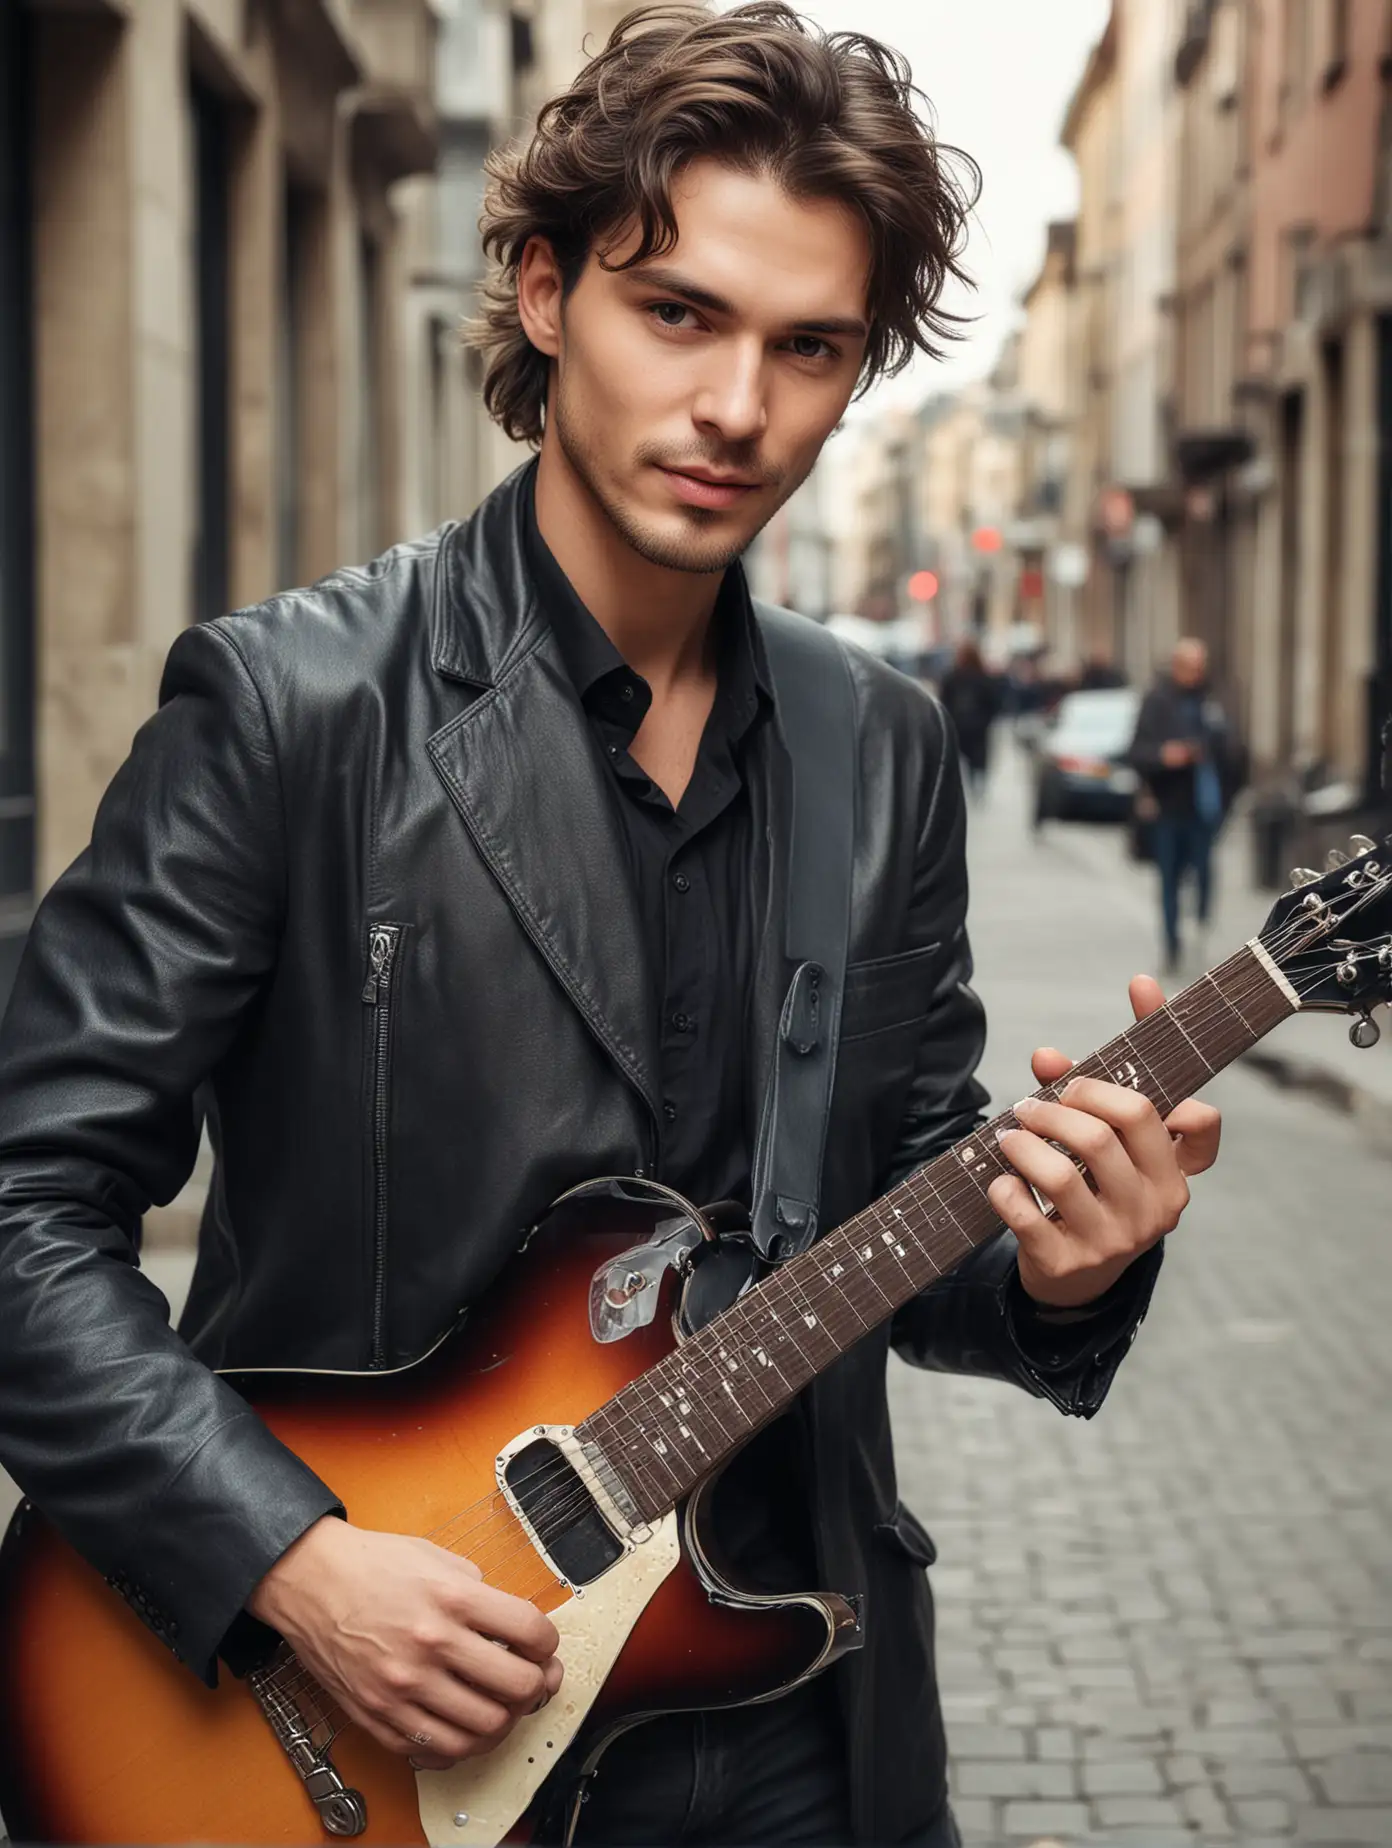 A handsome guitarist, playing the guitar, on the street, exquisite facial features, professional photography technology